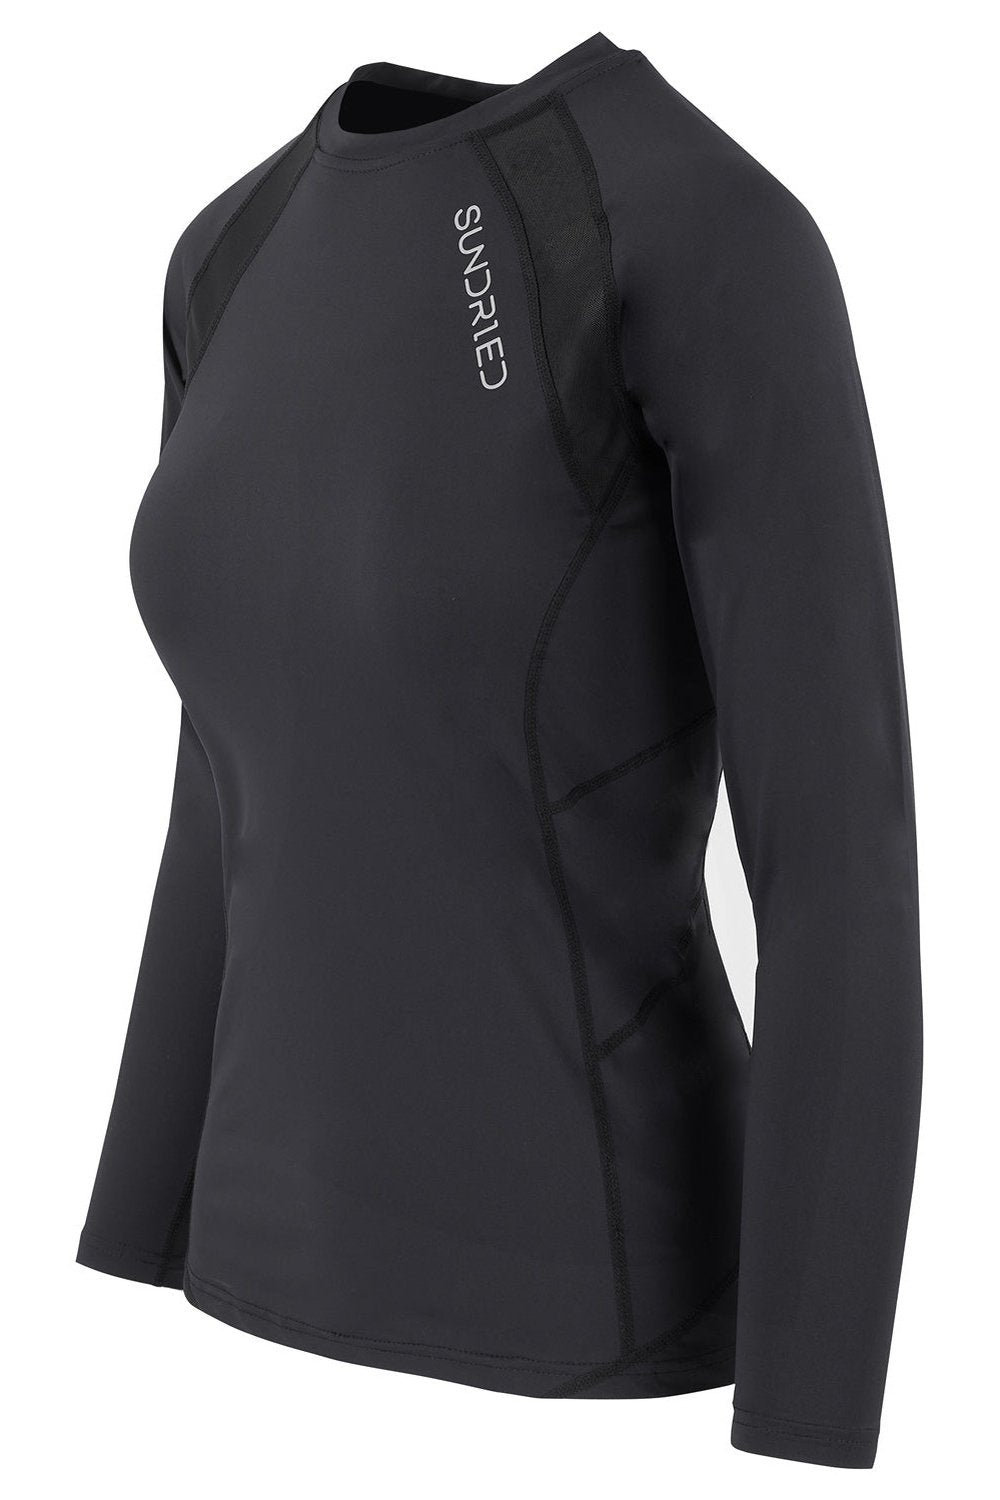 Sundried Women's Mesh Back Compression Style Top Long Sleeve Top Activewear